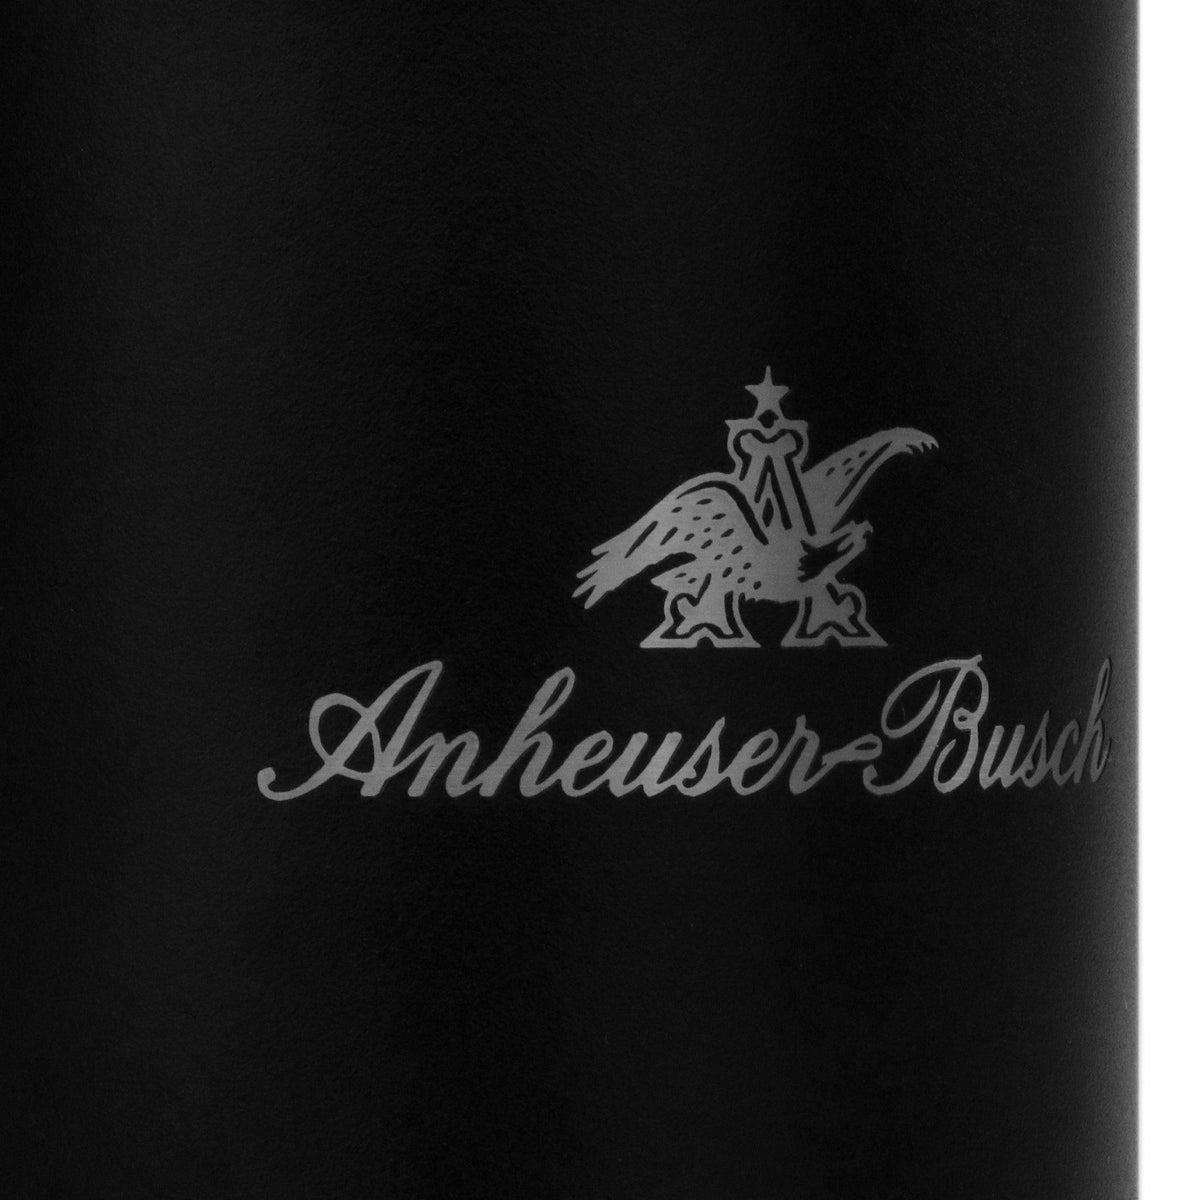 https://www.shopbeergears.shop/wp-content/uploads/1692/92/shop-online-at-a-eagle-yeti-12oz-can-colster-anheuser-busch-com_1.jpg